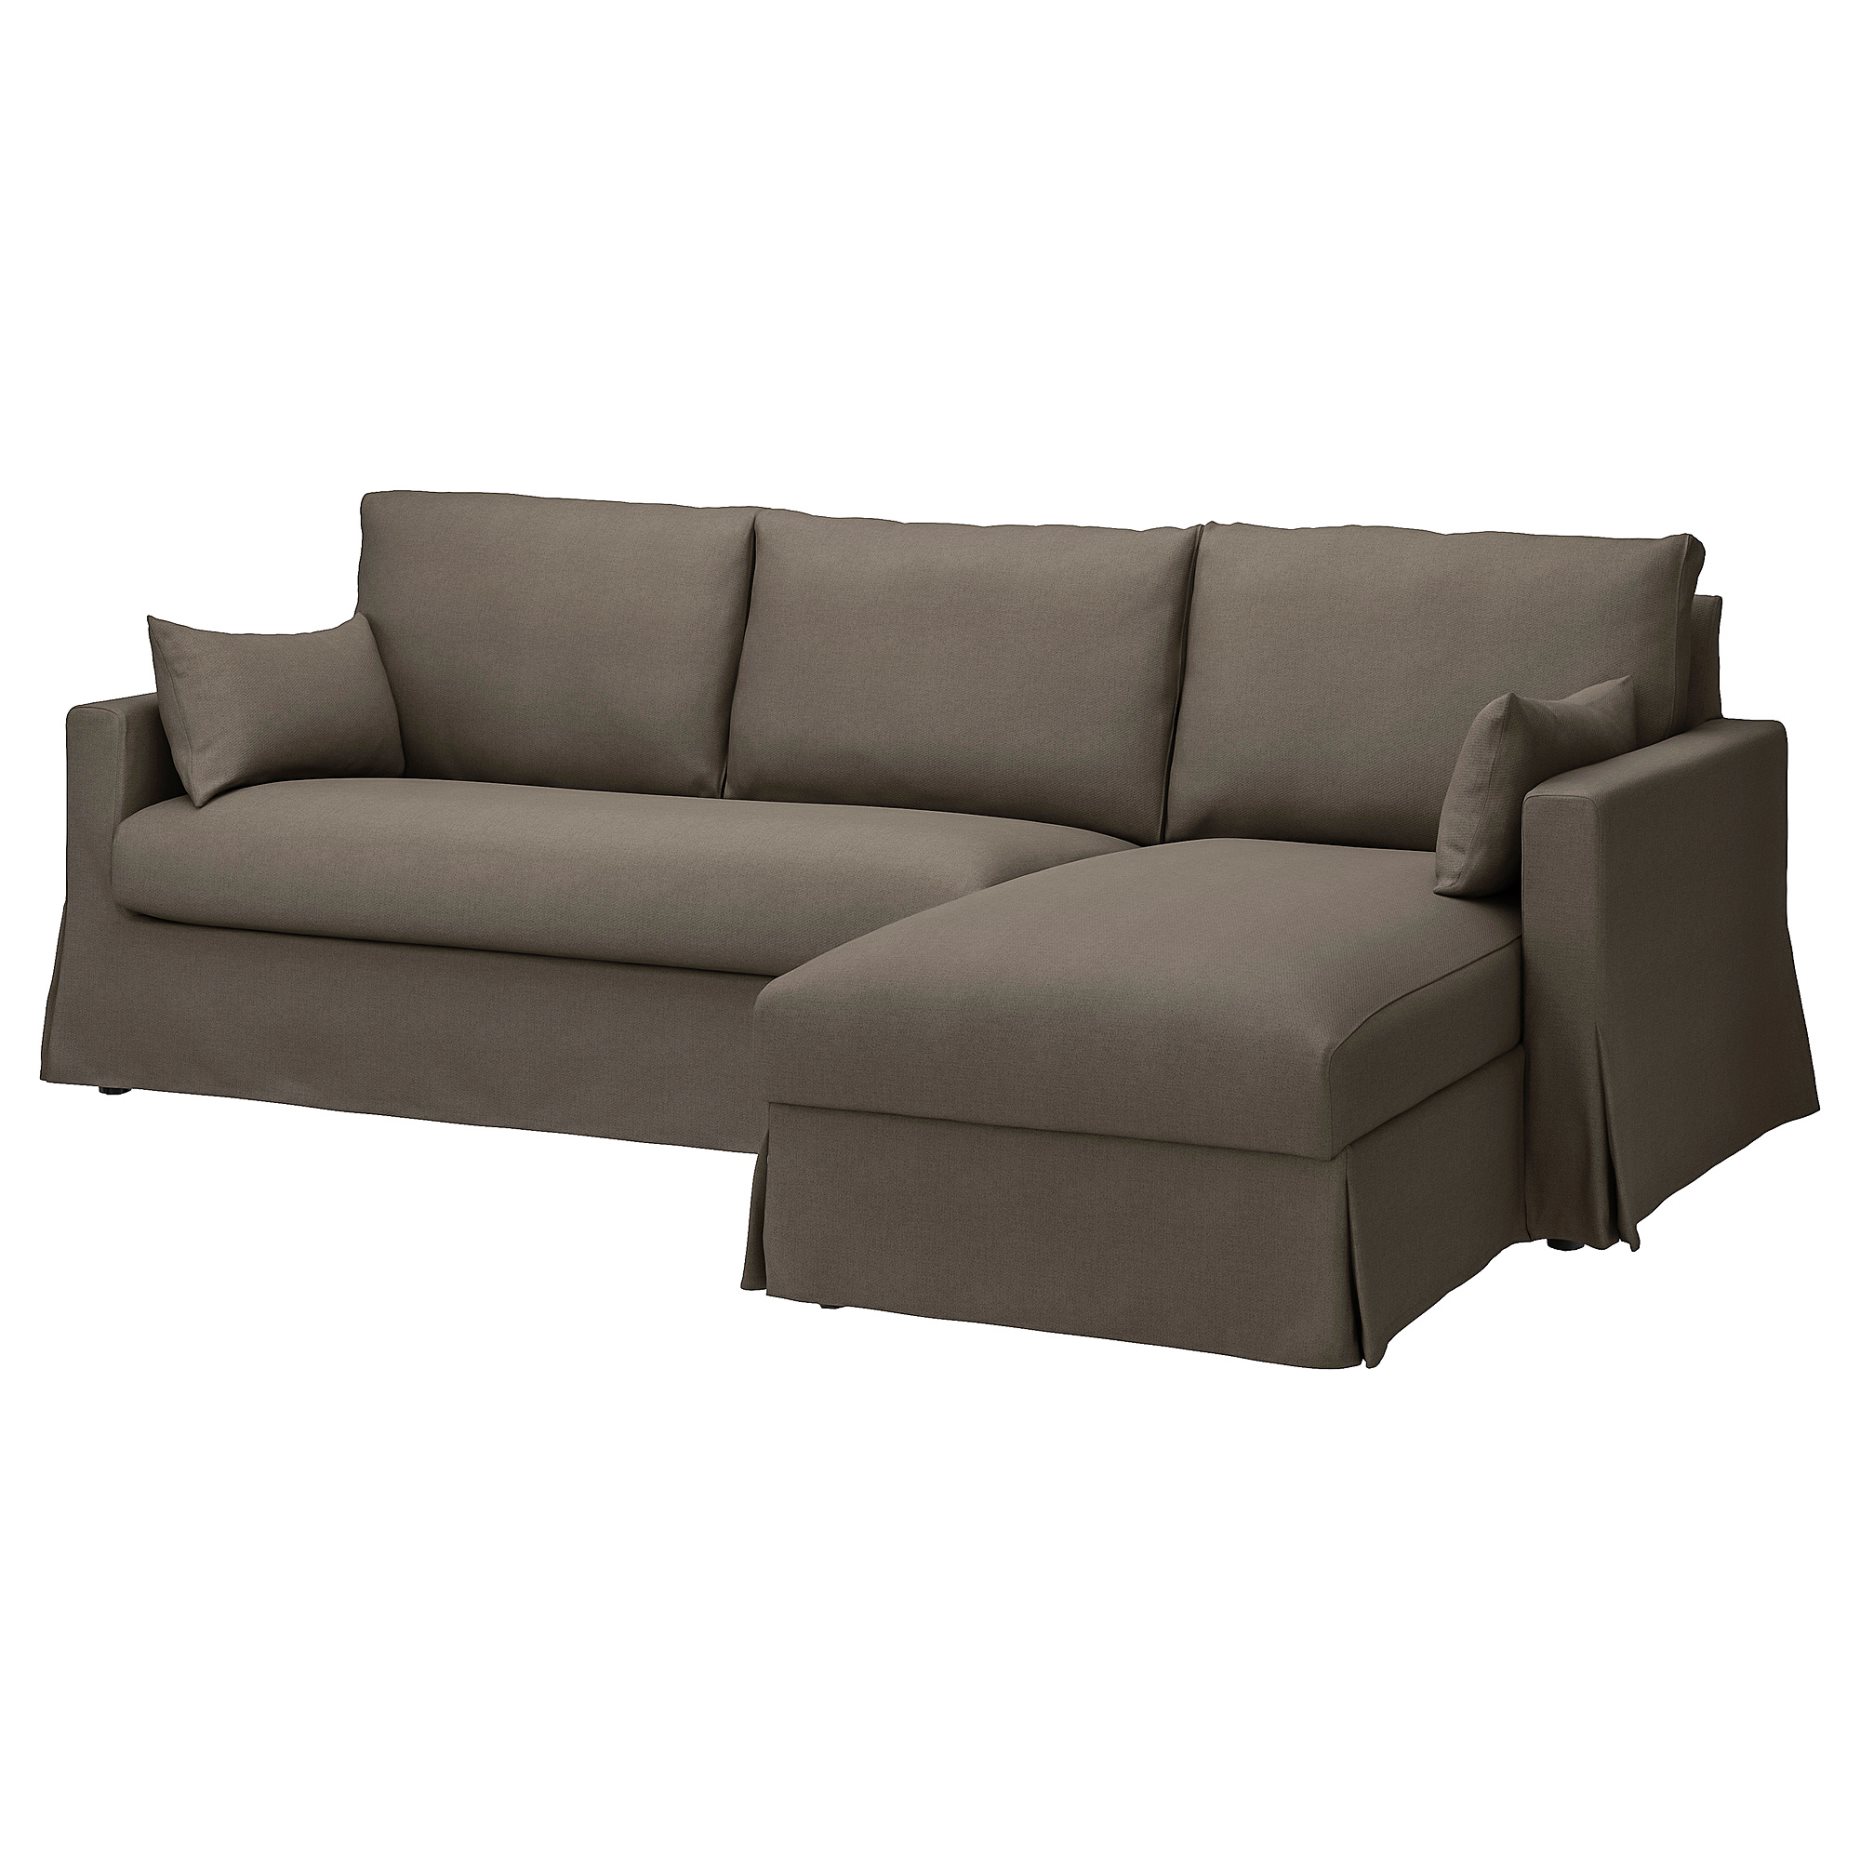 HYLTARP, cover f 3-seat sofa with chaise long, right, 105.473.68